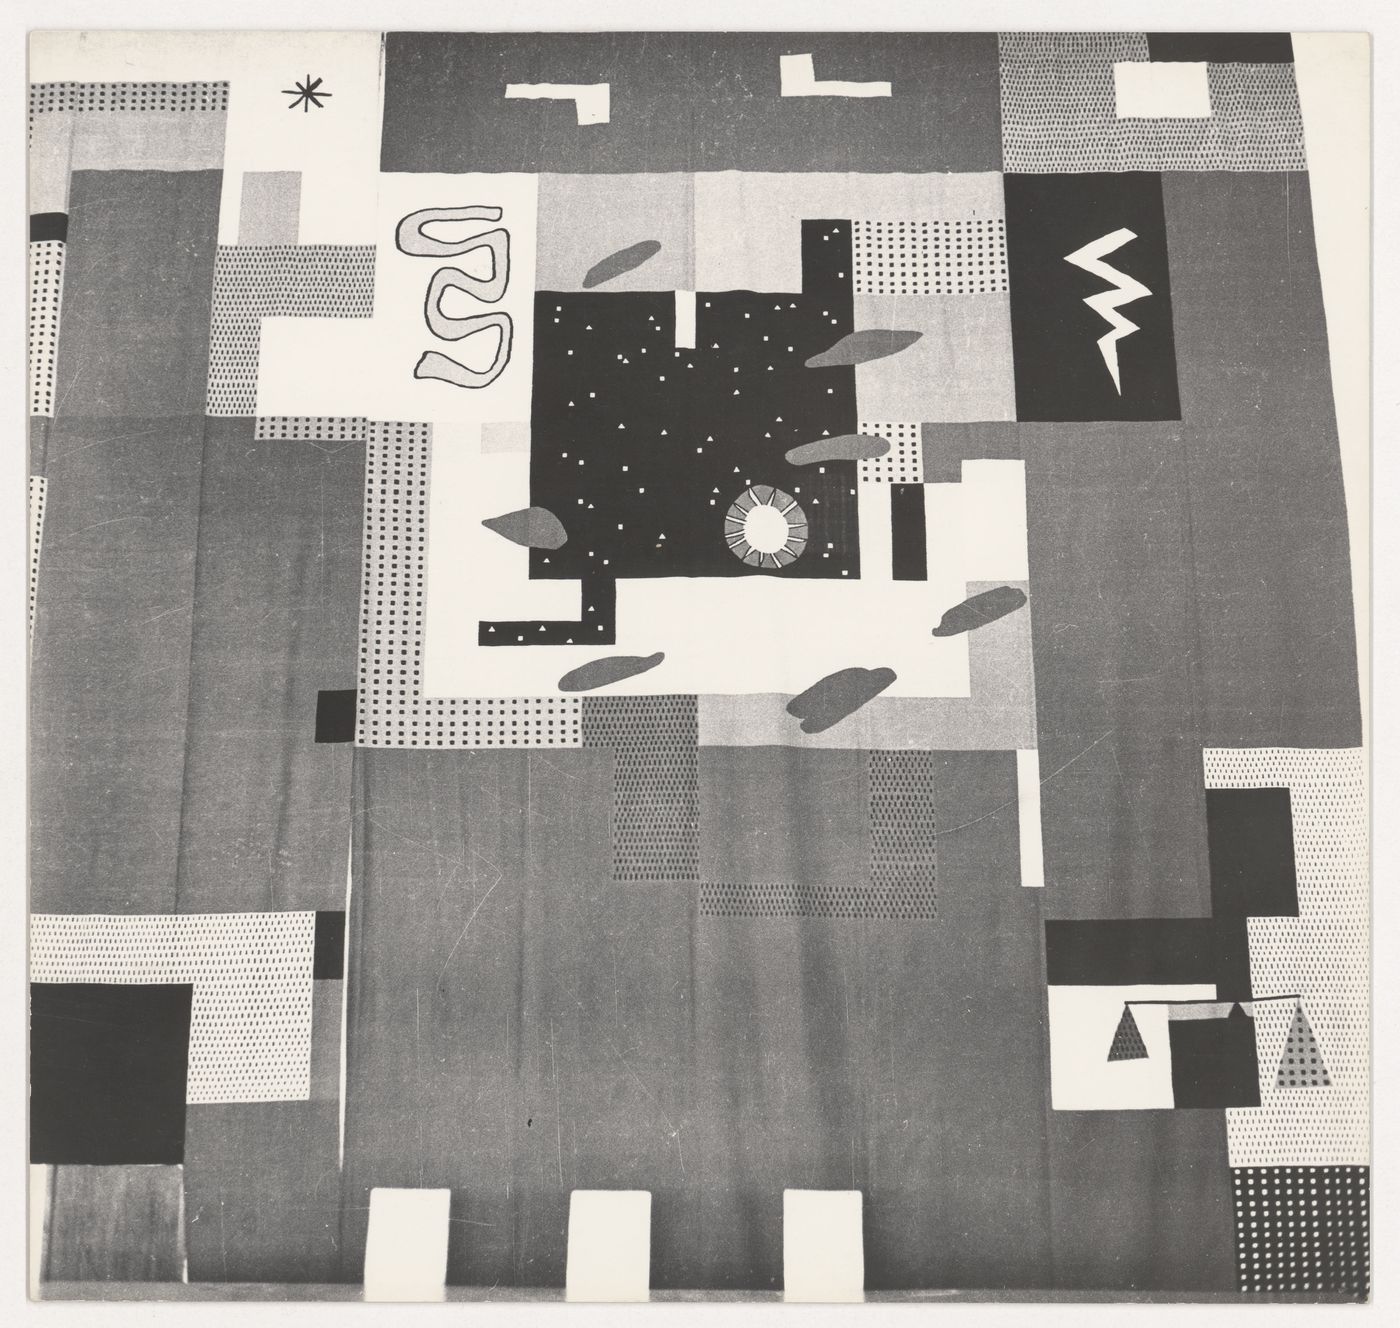 View of a High Court tapestry designed by Le Corbusier, Chandigarh, India